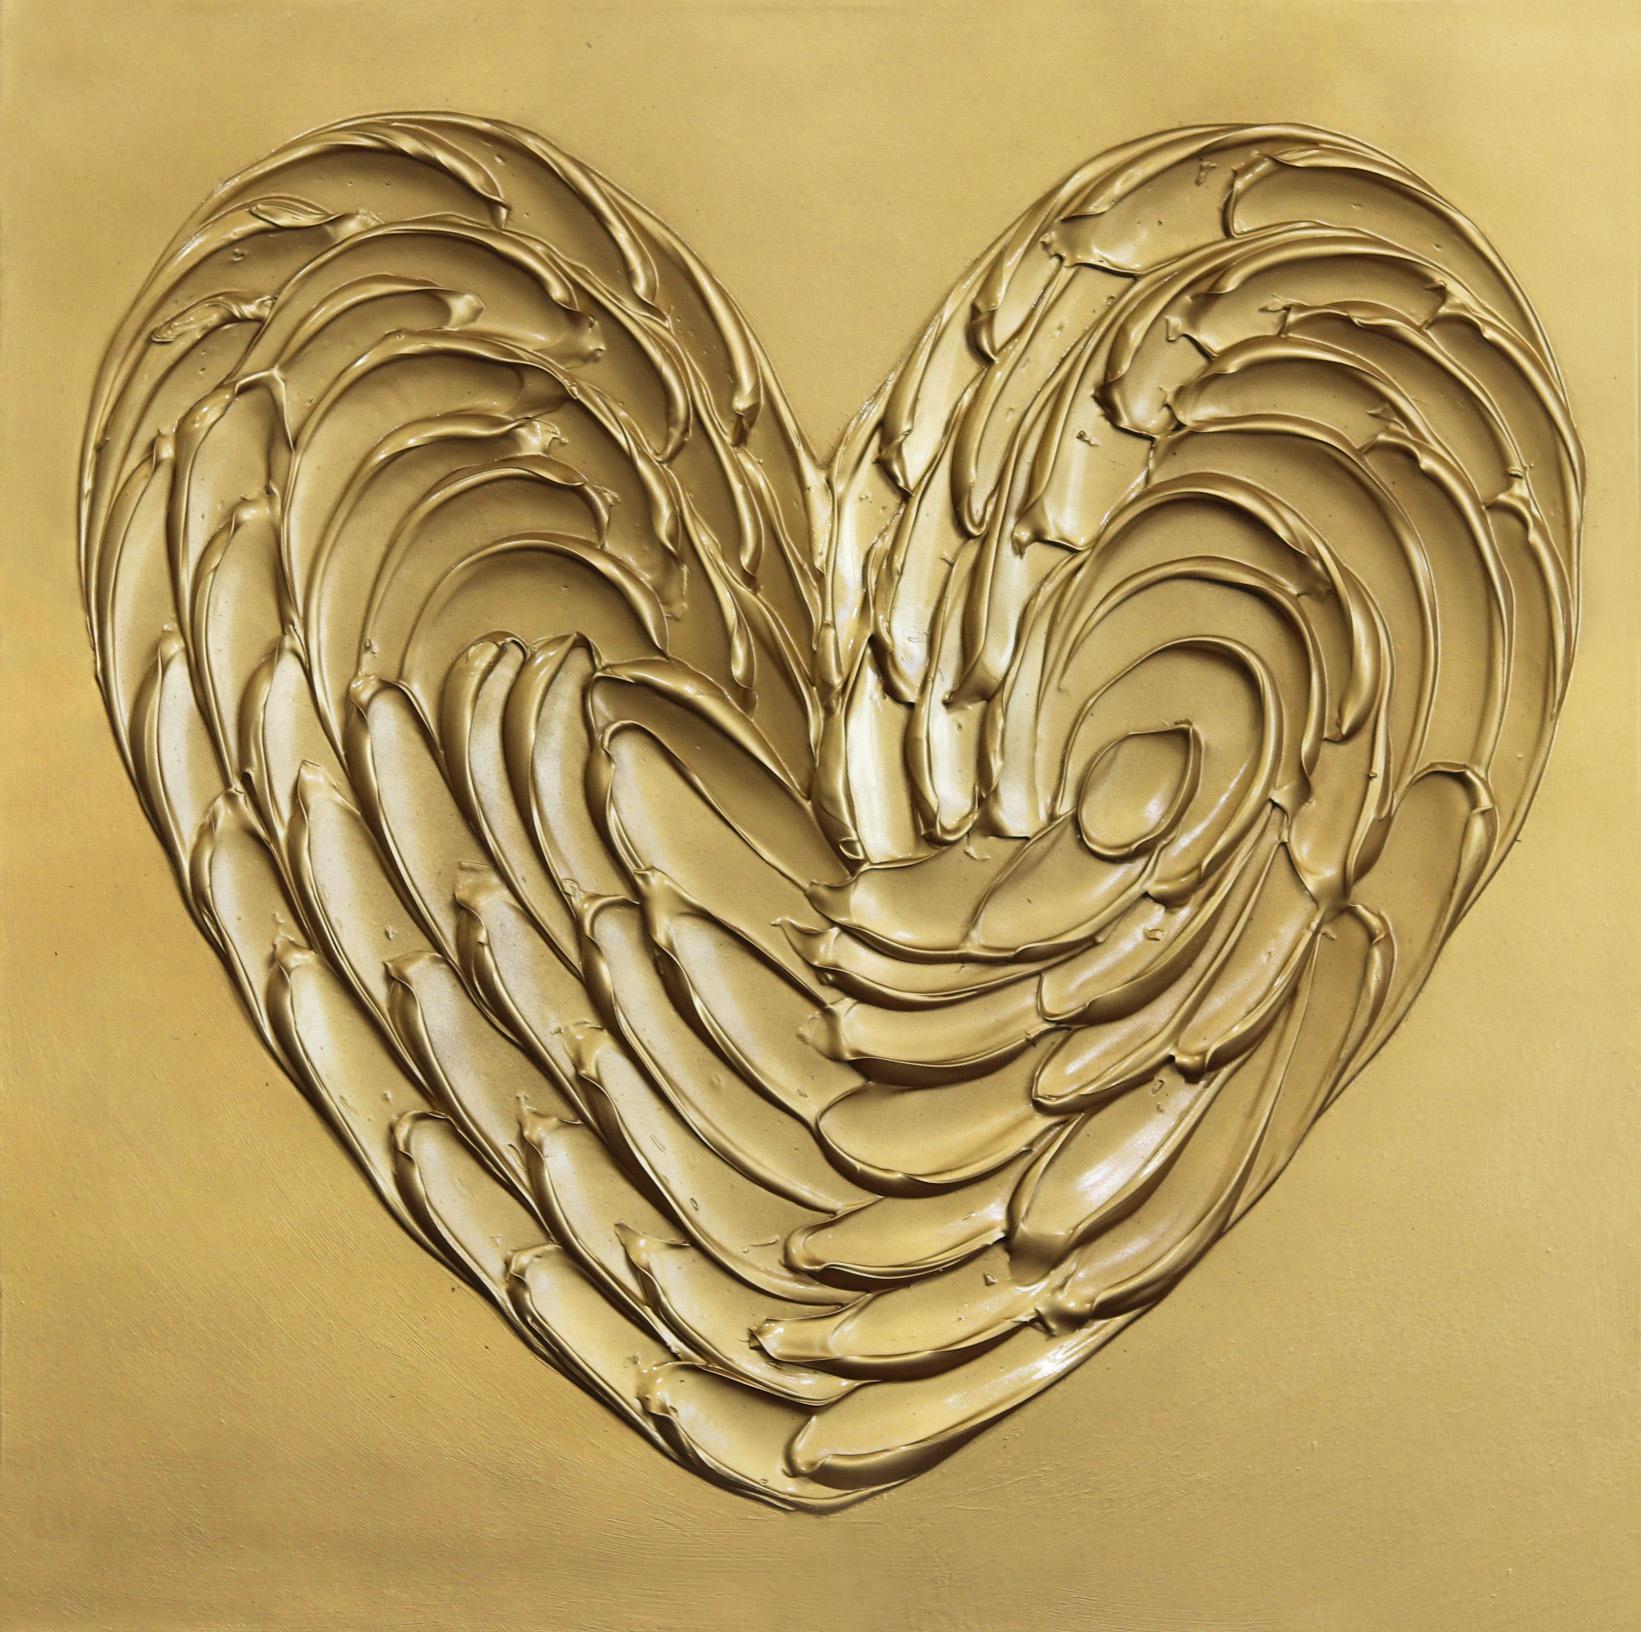 Cynthia Coulombe Bégin Figurative Painting - Gold Love No. 5 - Original Textured Geometric Pattern Vivid Heart Painting 